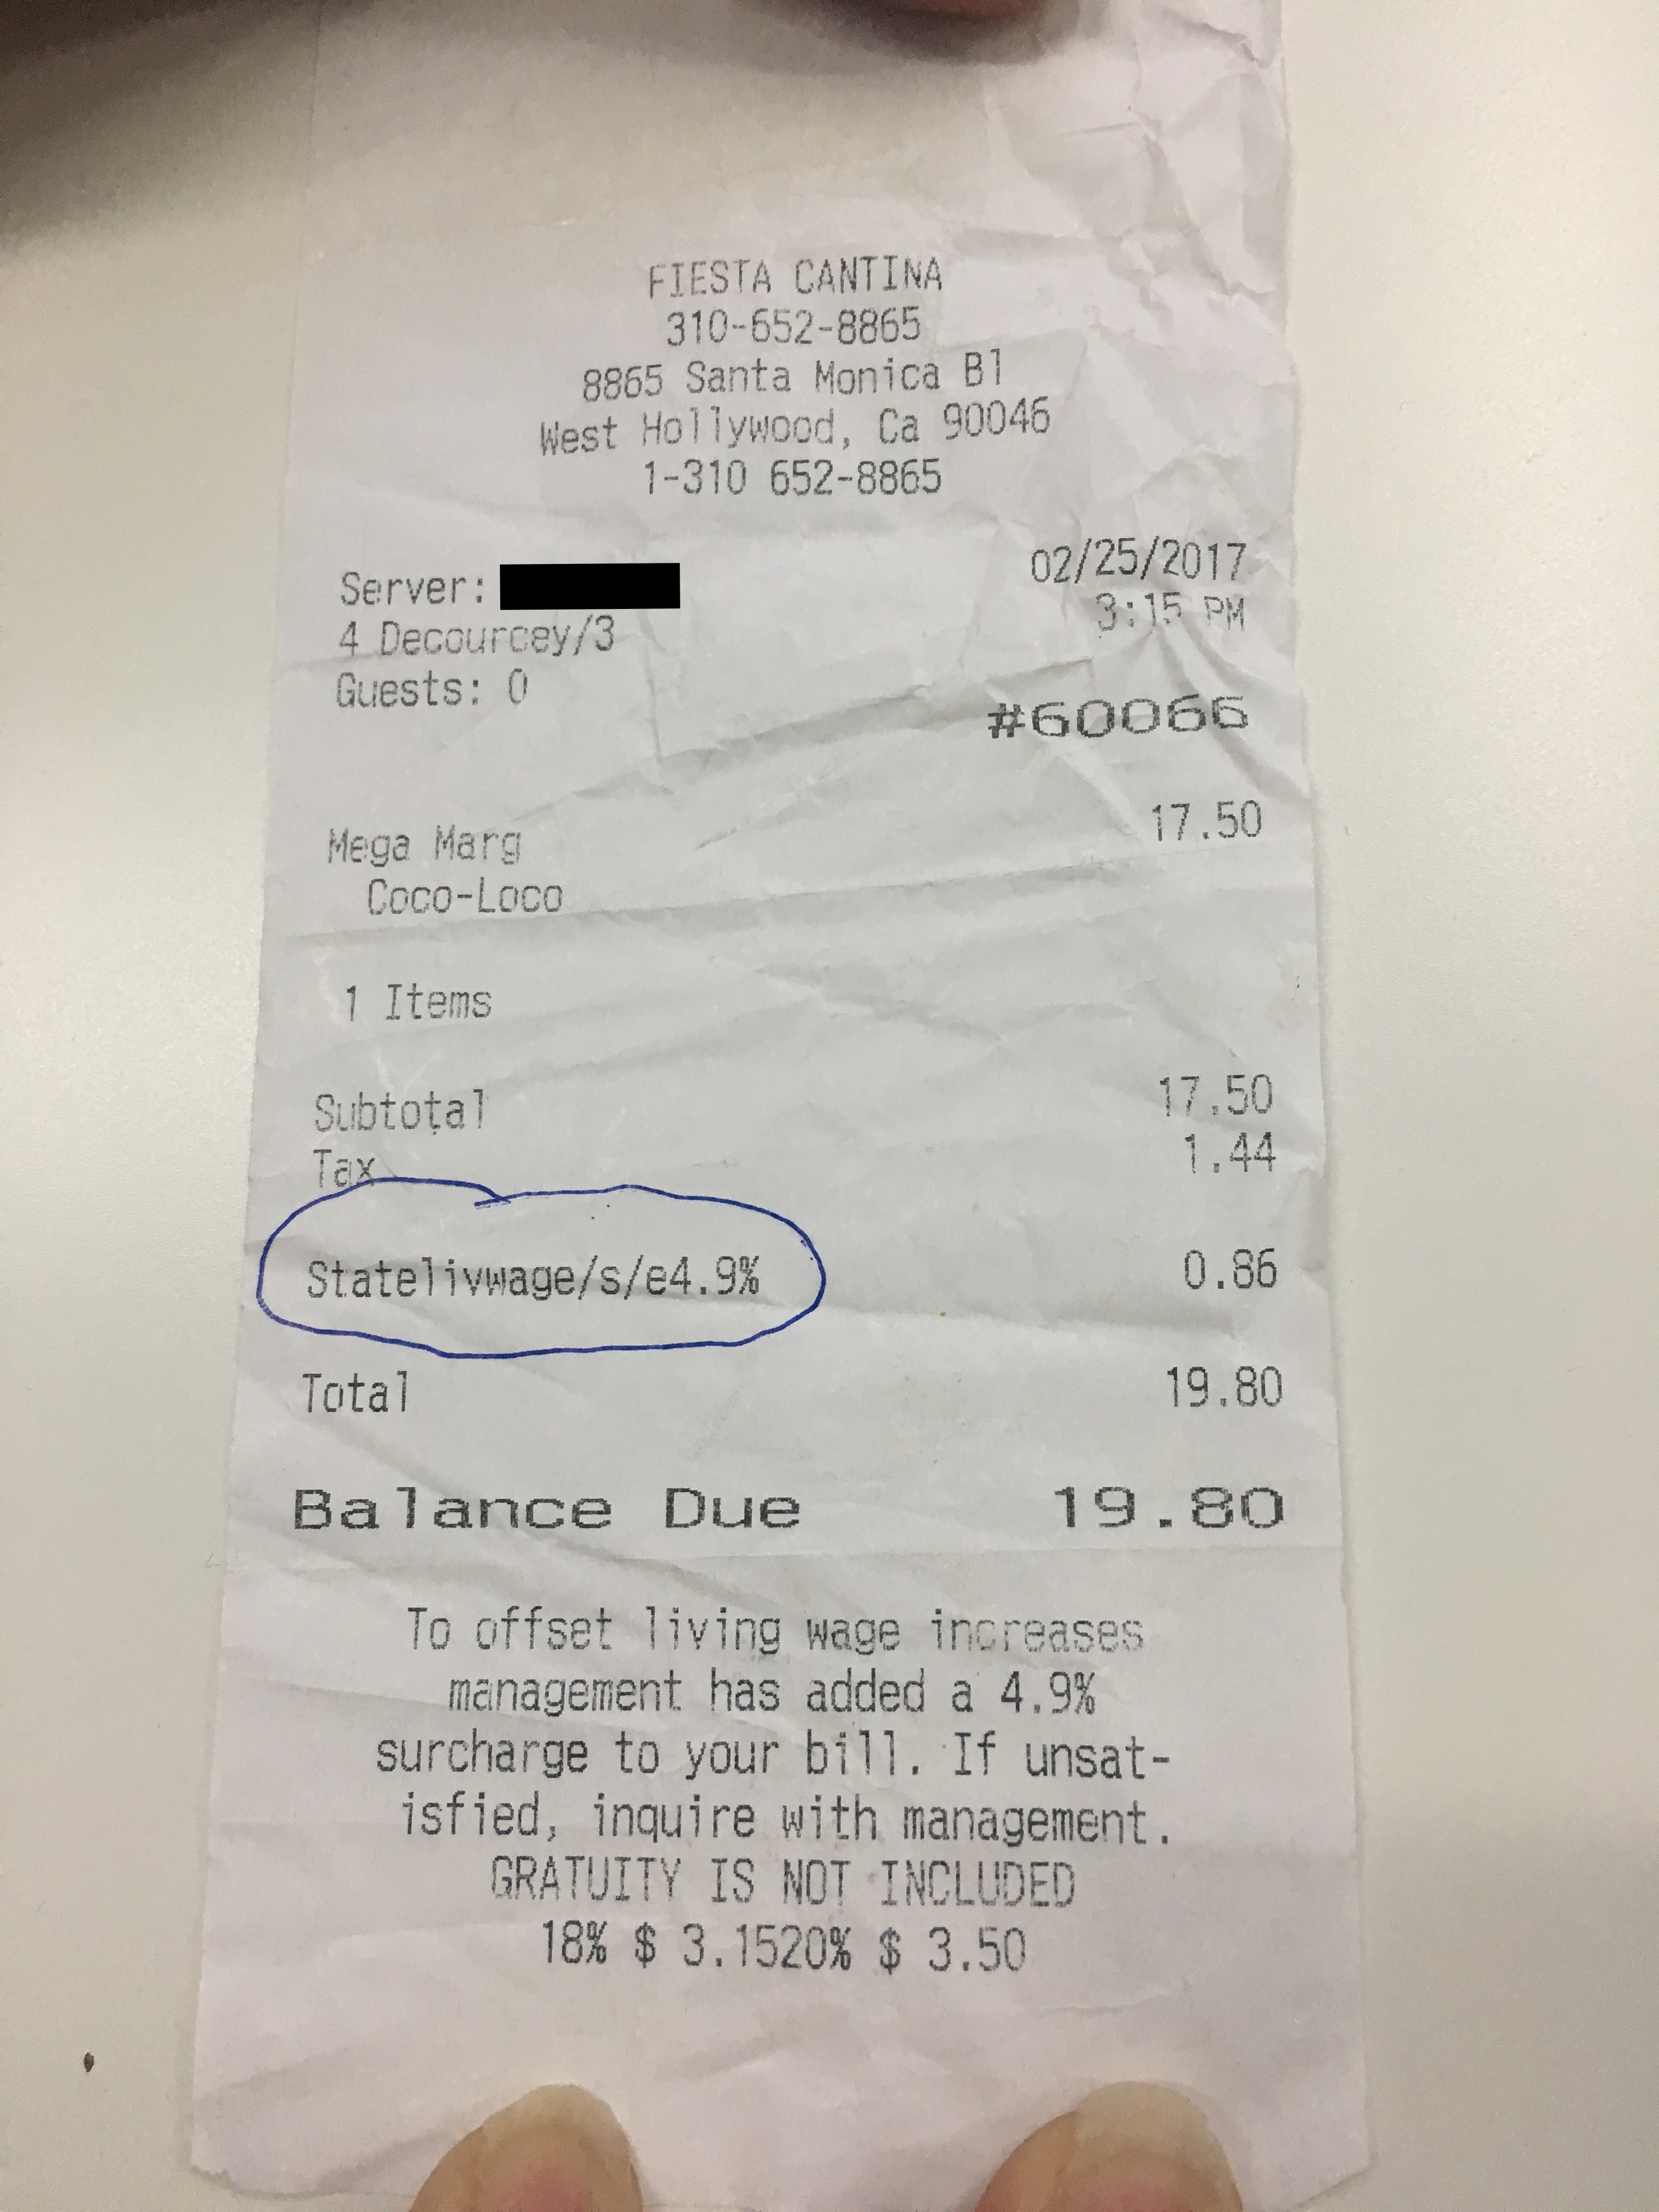 A receipt from Feb. 25 at Fiesta Cantina in Los Angeles. 